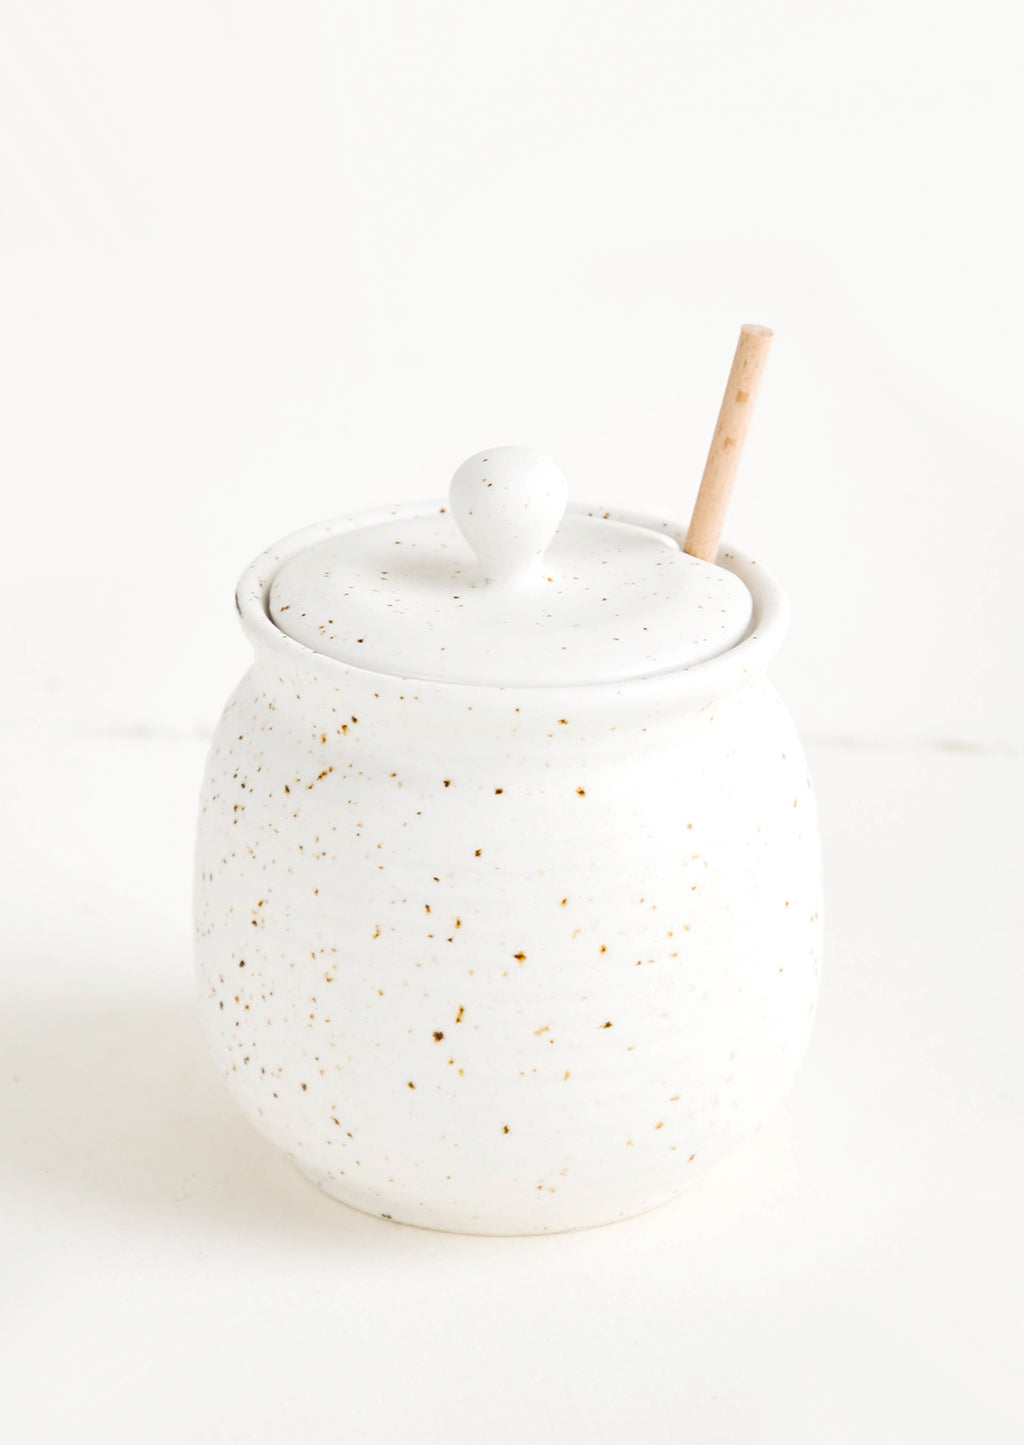 1: Round ceramic honey jar in speckled white glaze with fixed slot in lid for dipper